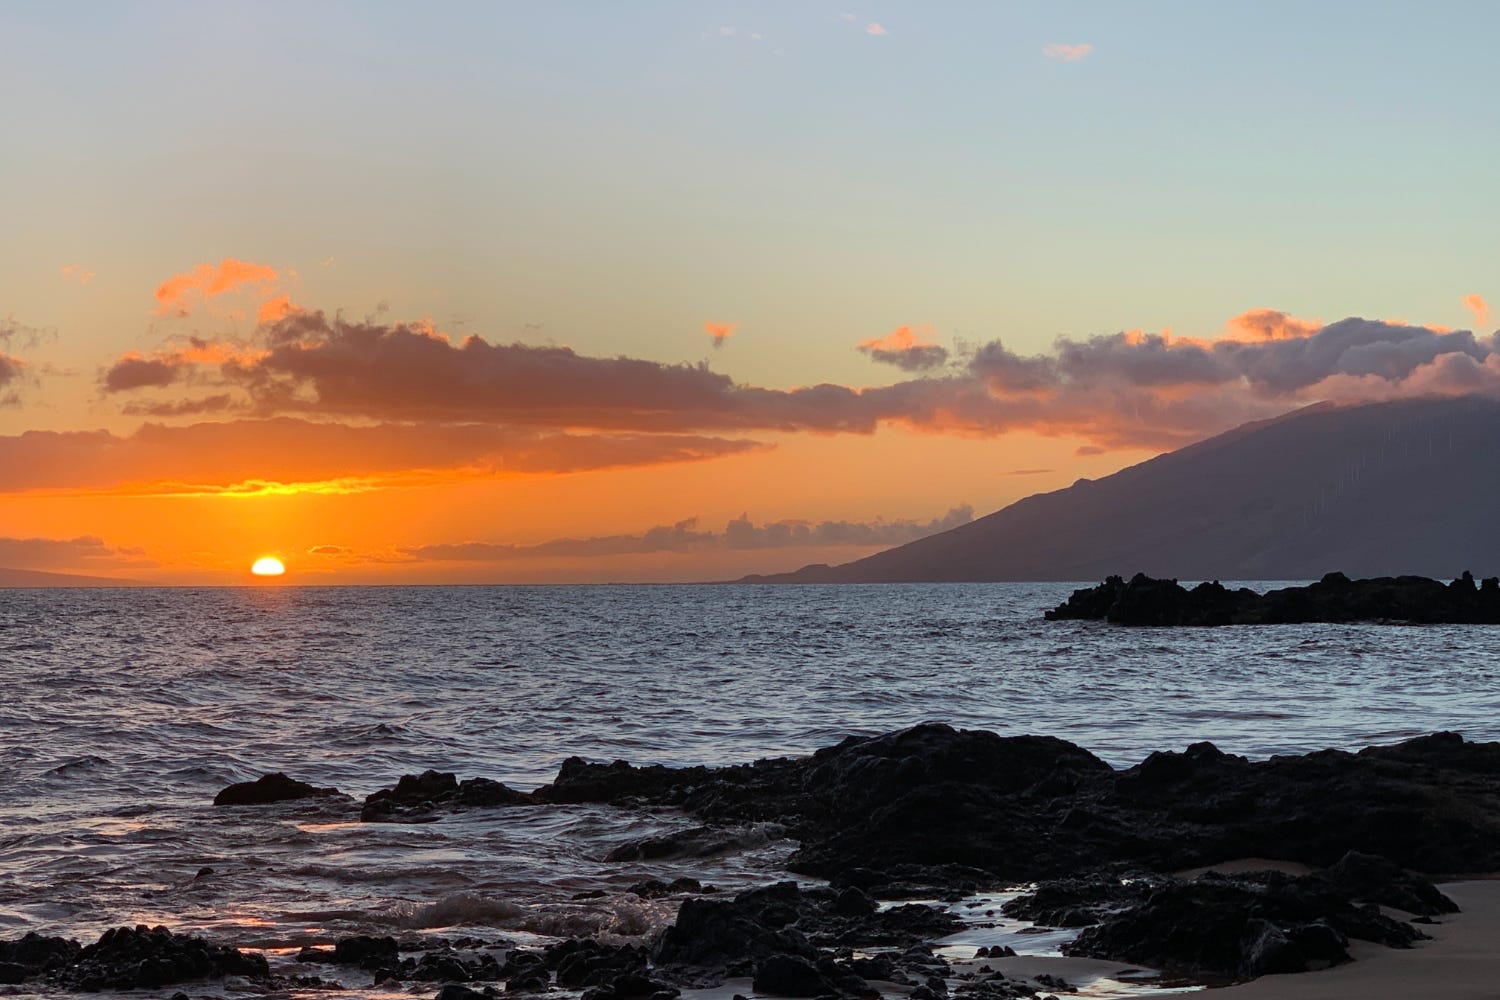 Maui Is Open for Travel, but the Loss of Lahaina May Reshape